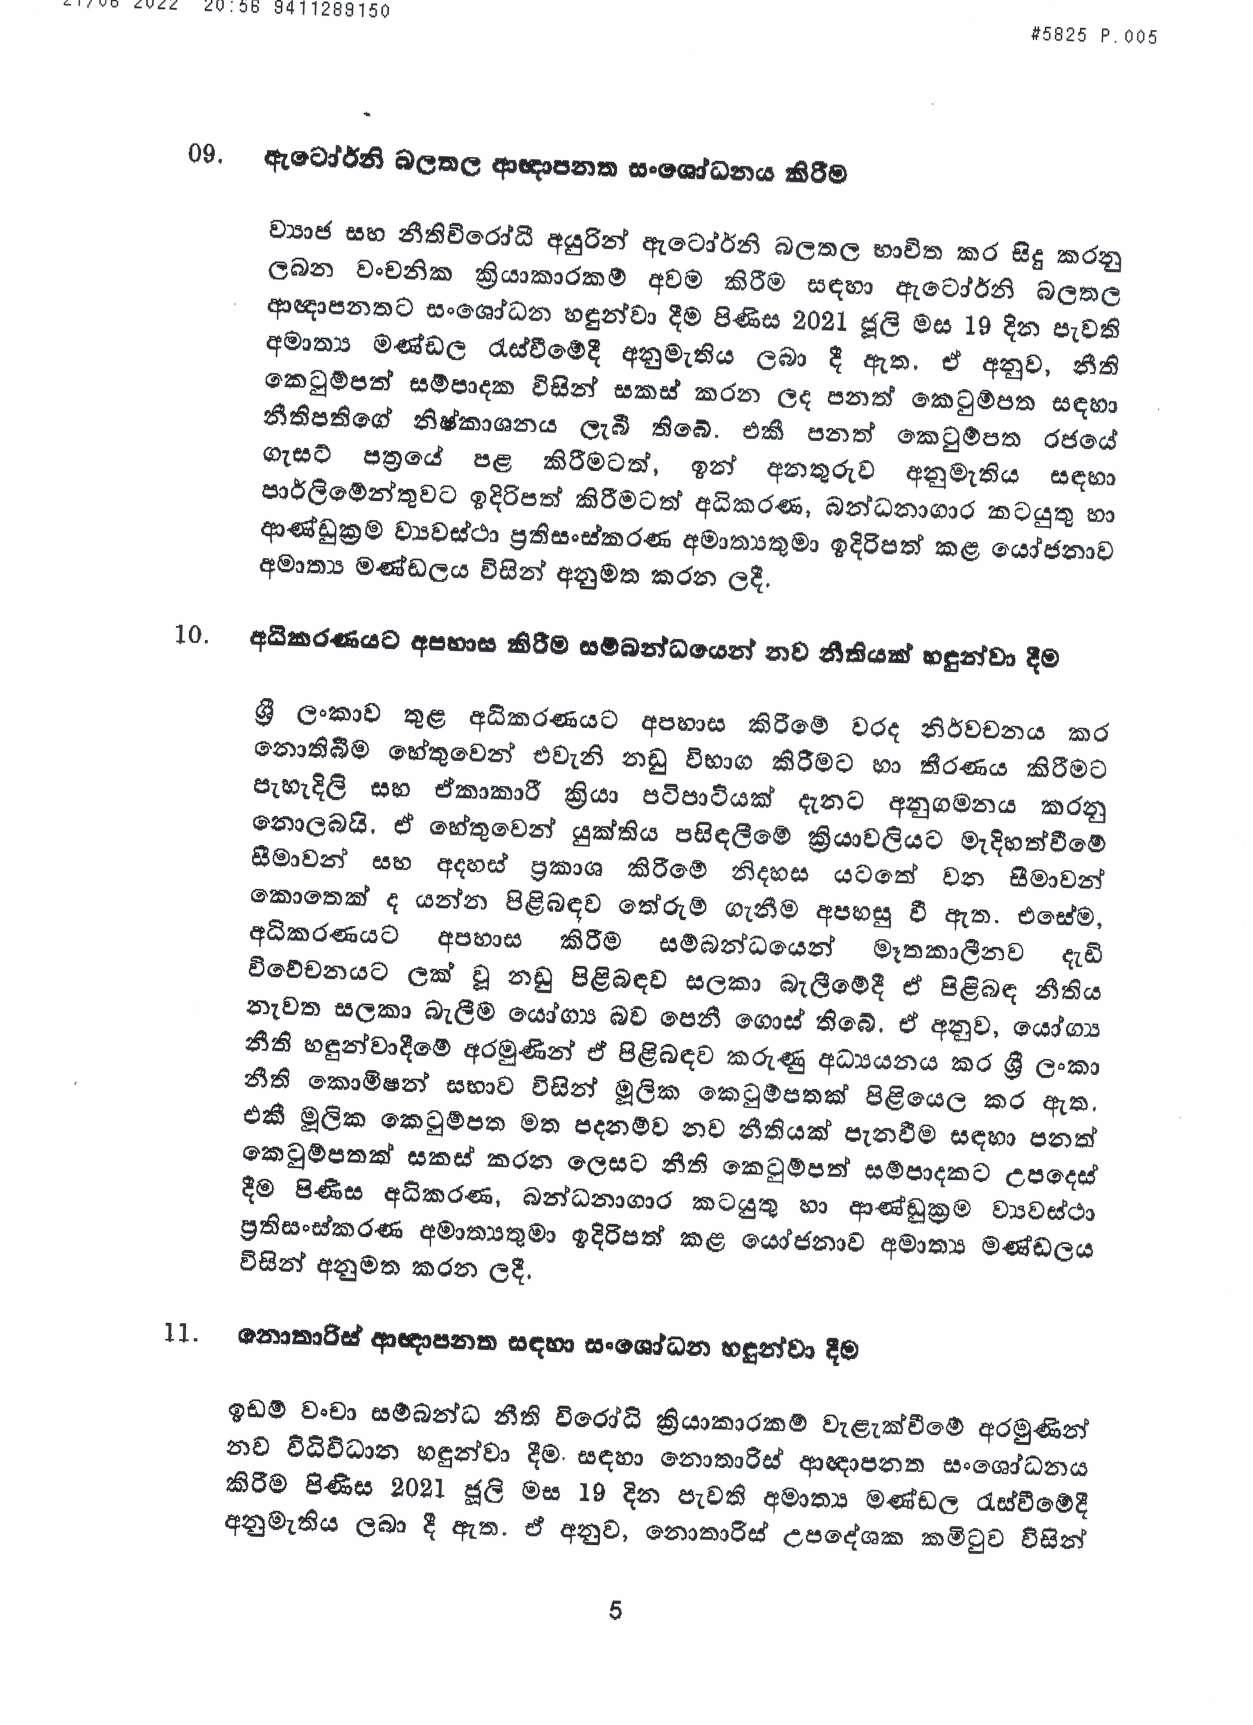 Cabinet Decisions on 27.06.2022 S page 005